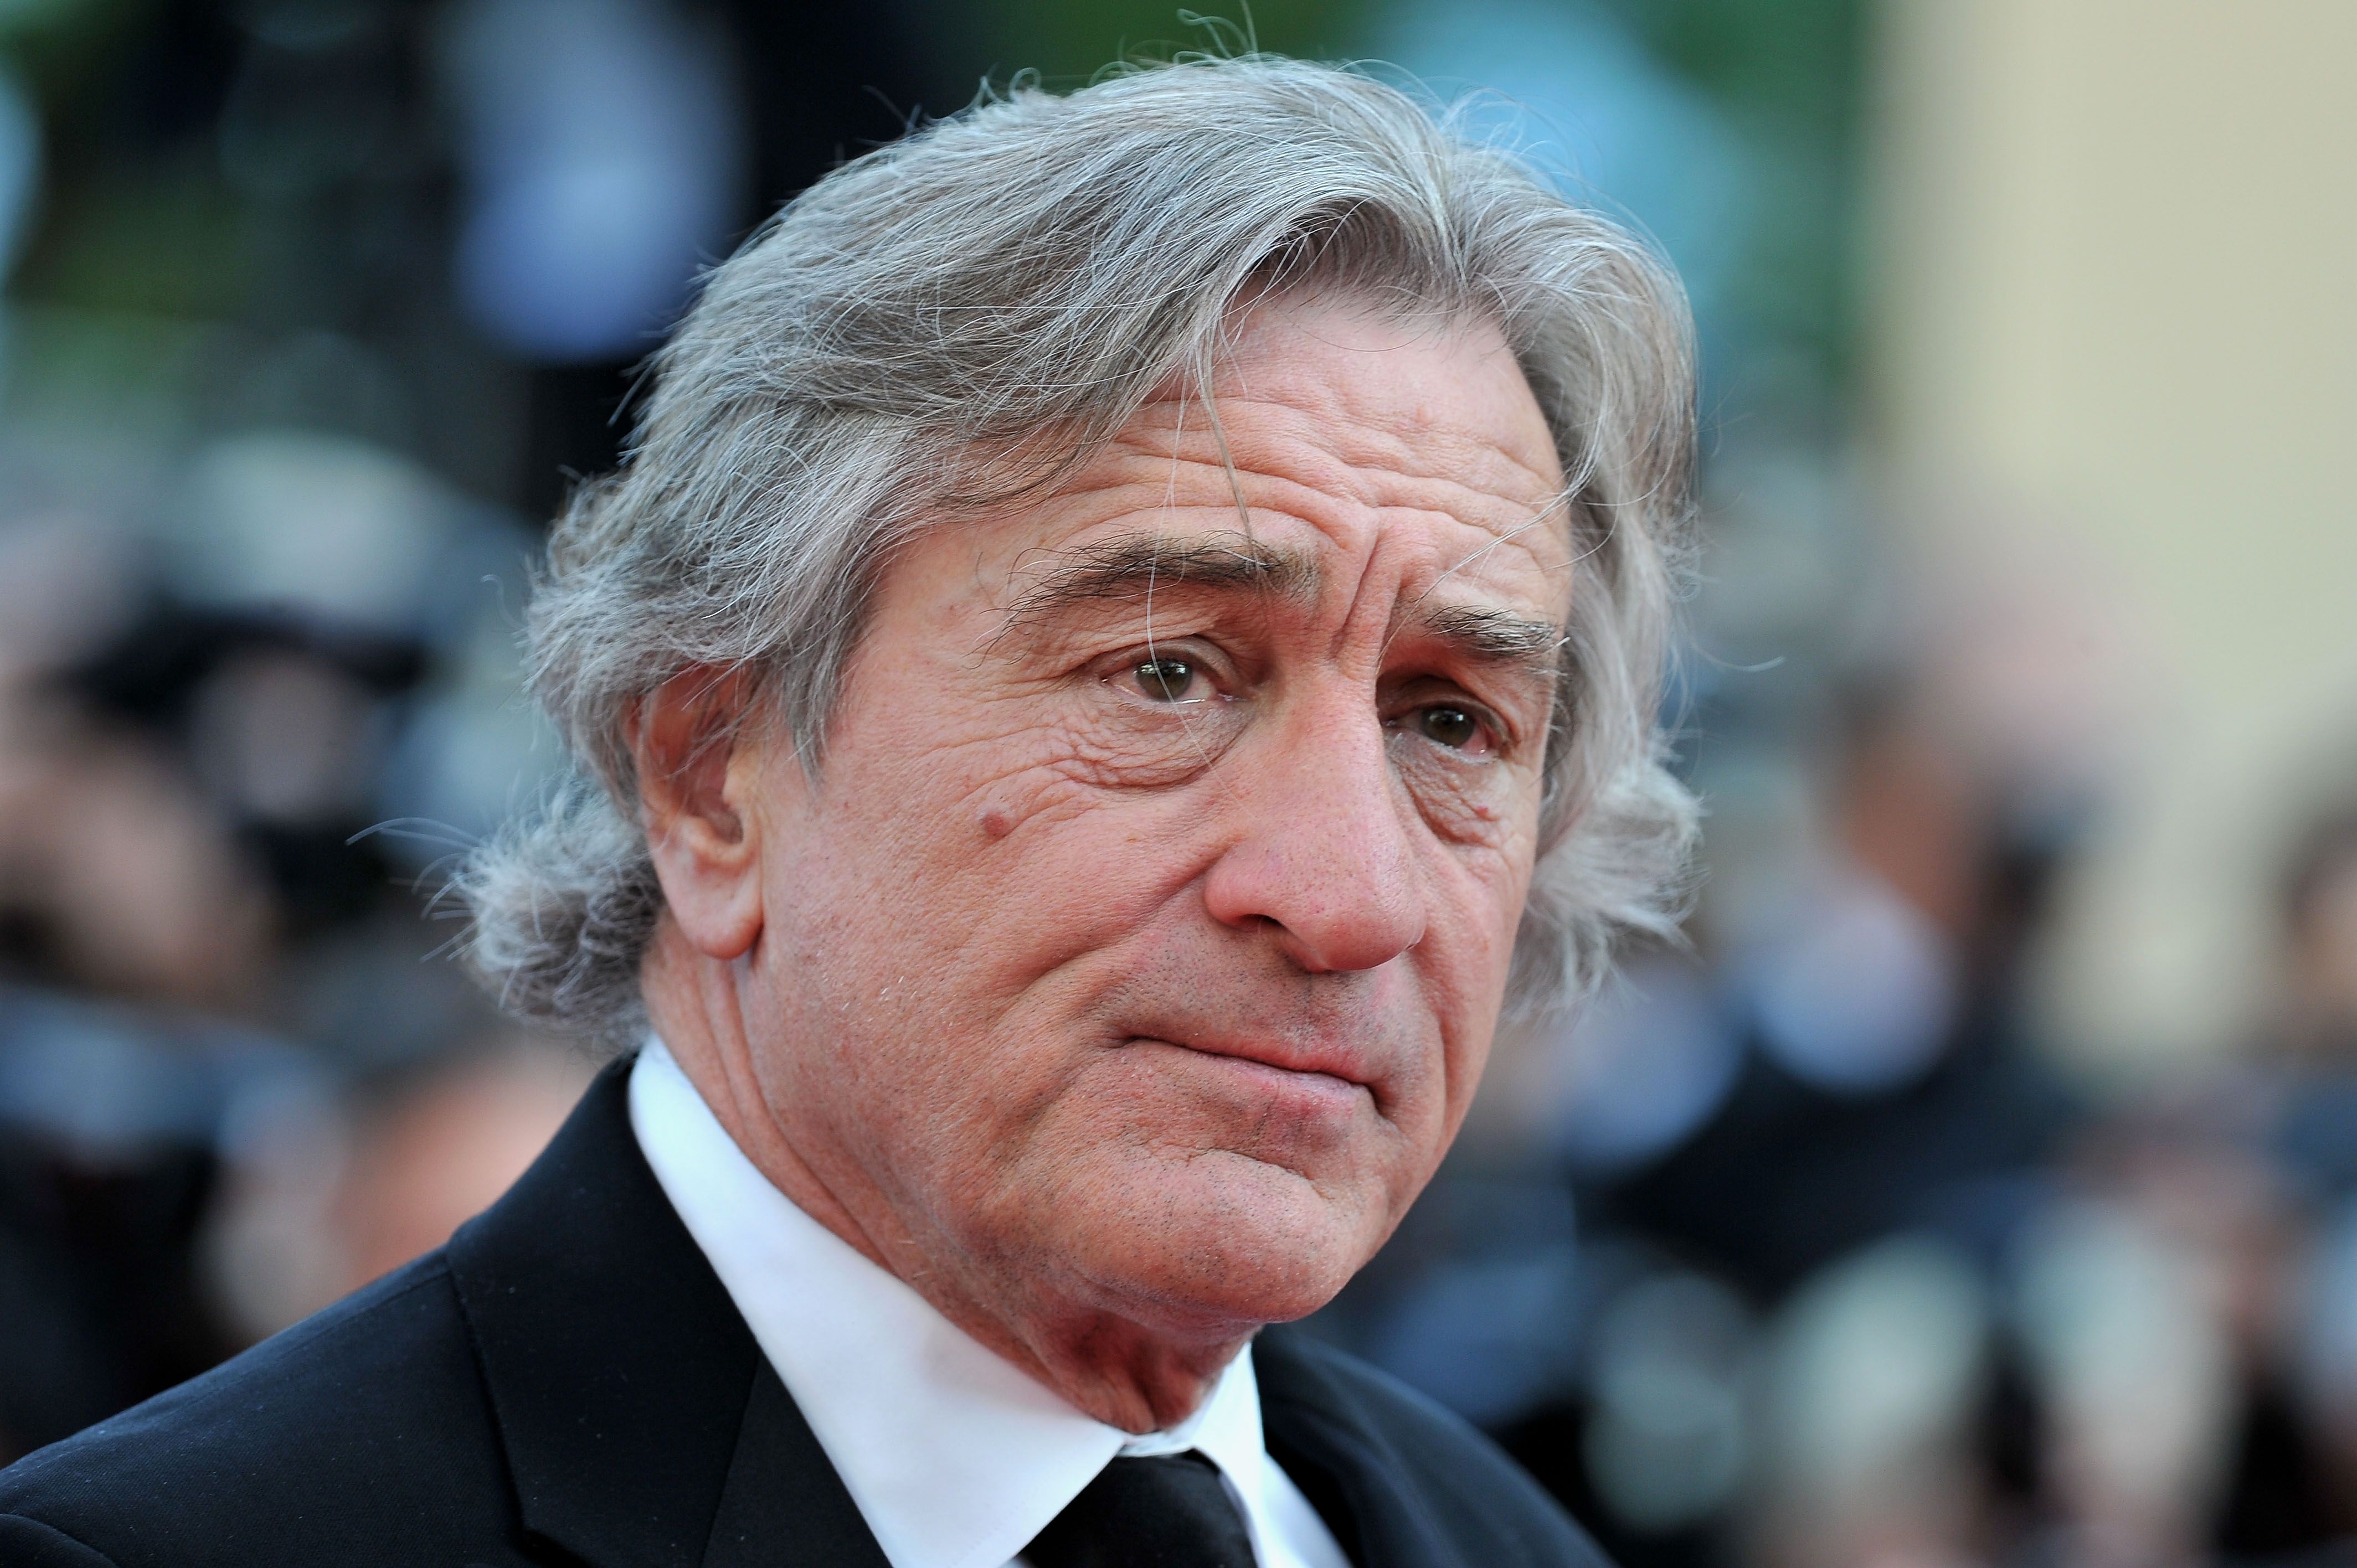 Robert De Niro attends the 'Once Upon A Time' Premiere during 65th Annual Cannes Film Festival during at Palais des Festivals on May 18, 2012 in Cannes, France. | Source: Getty Images